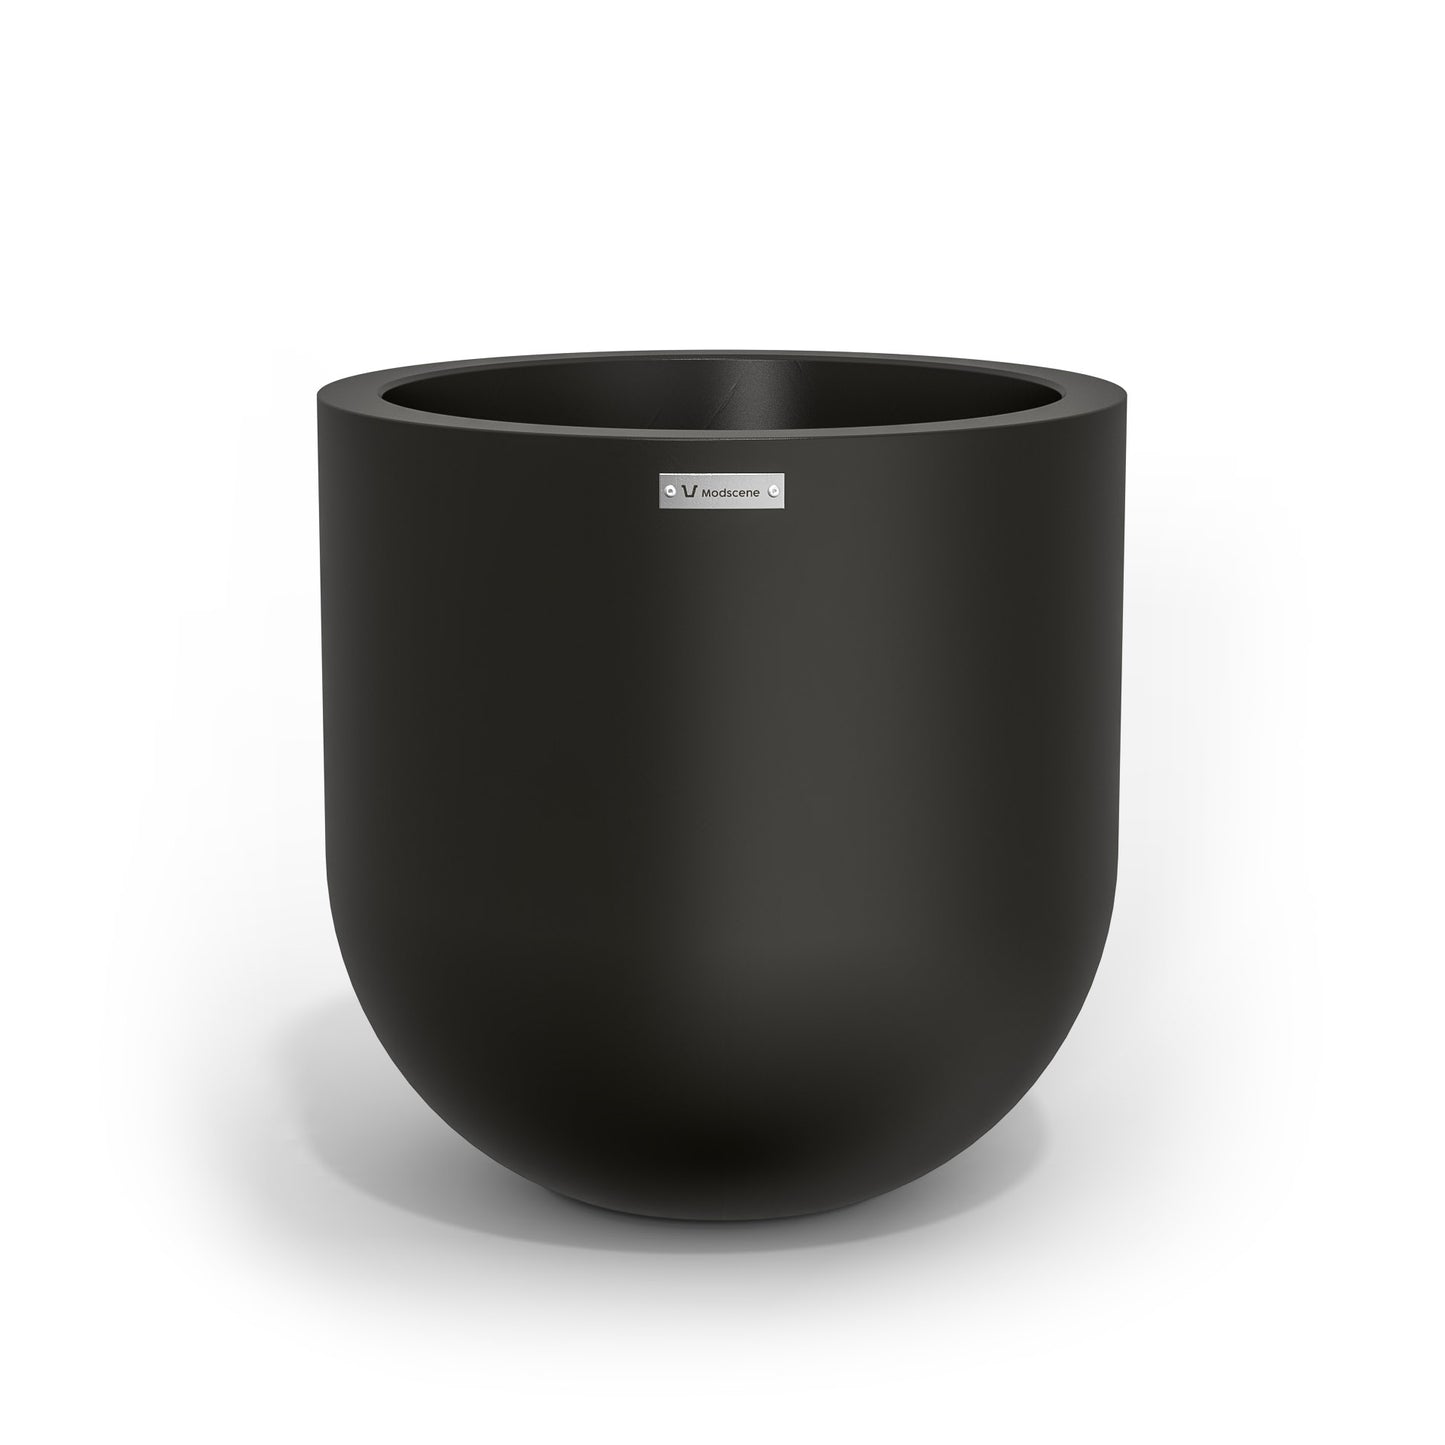 A medium sized planter pot in black made by Modscene.